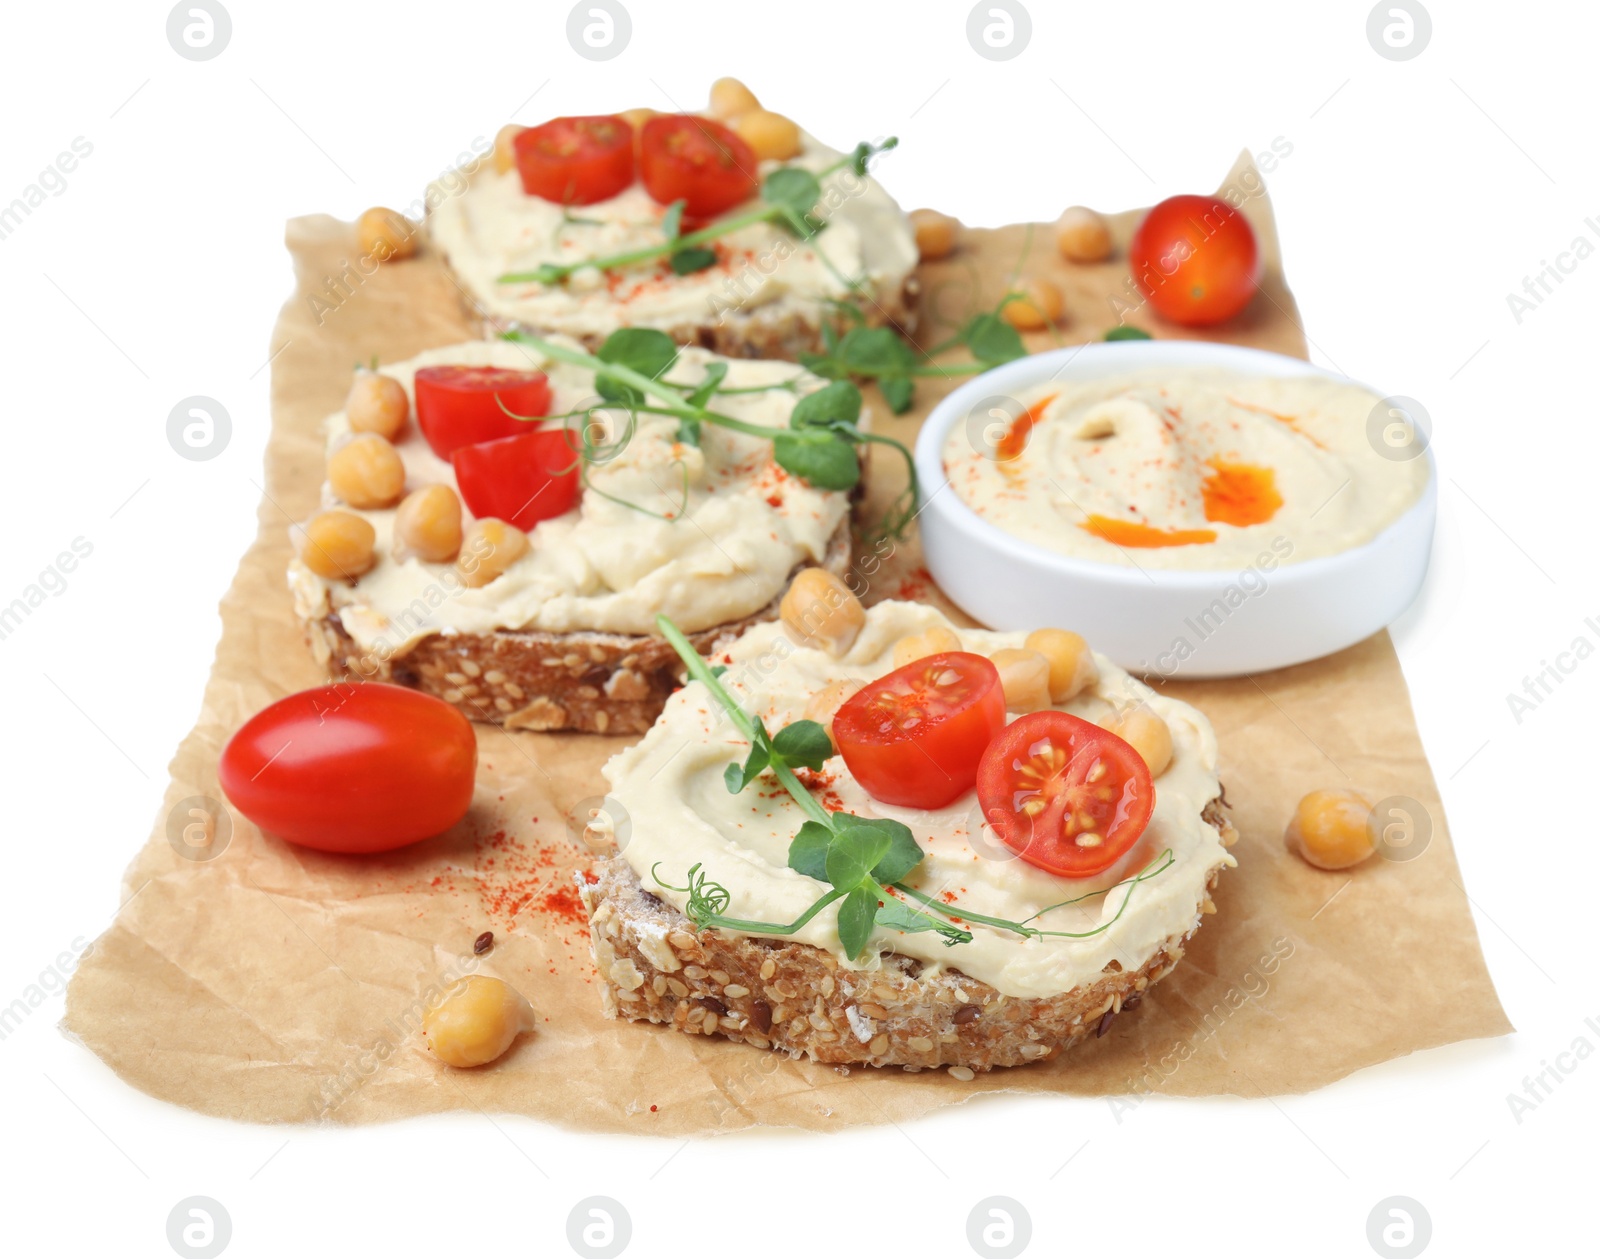 Photo of Delicious sandwiches with hummus and ingredients on white background